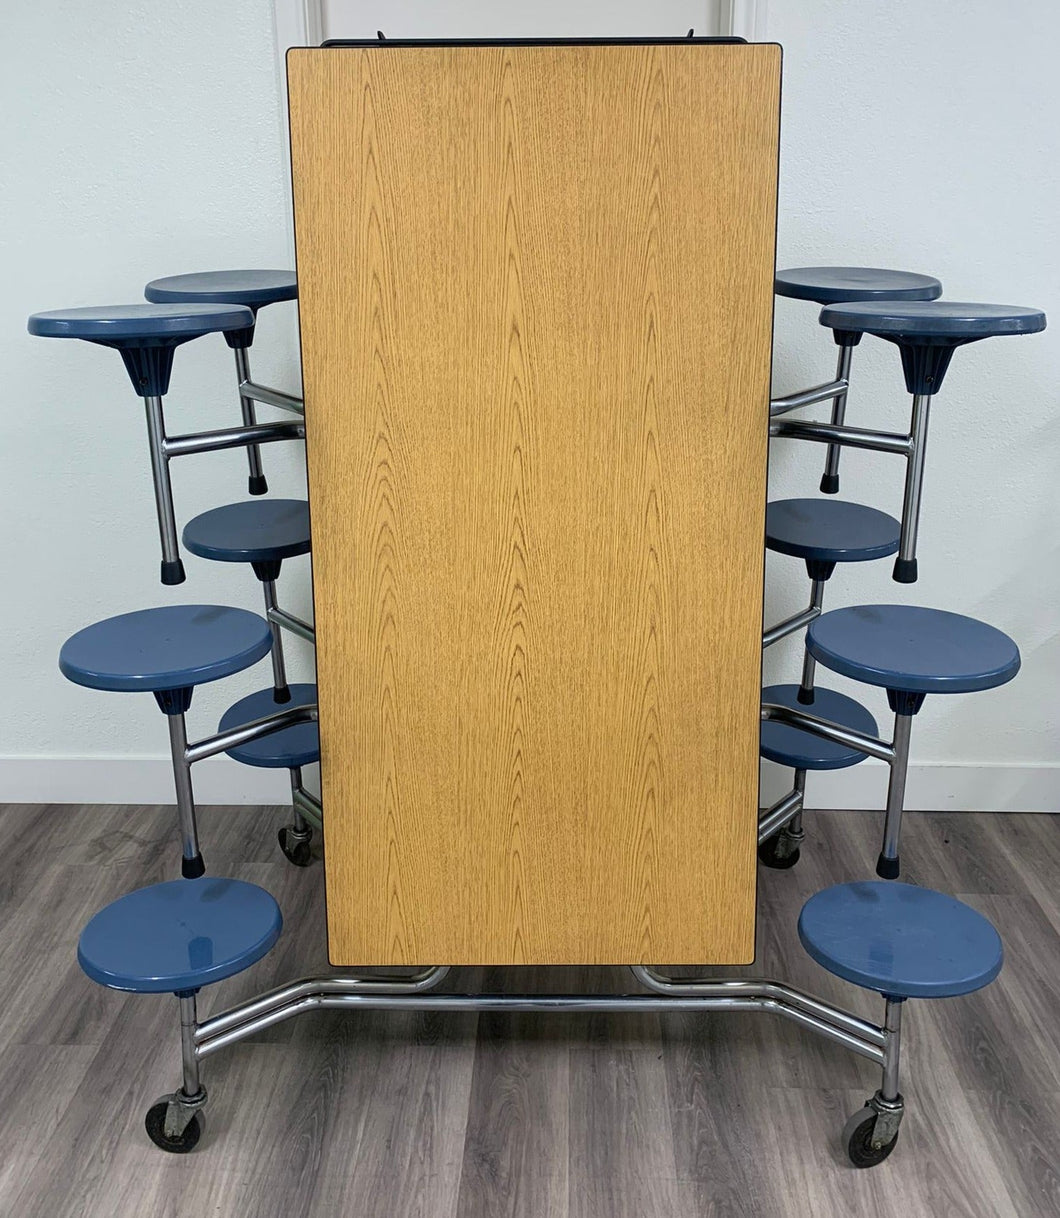 10ft Cafeteria Lunch Table w/ 12 Stool Seat, Light Oak Top, Blue Seat, Adult Size (RF)